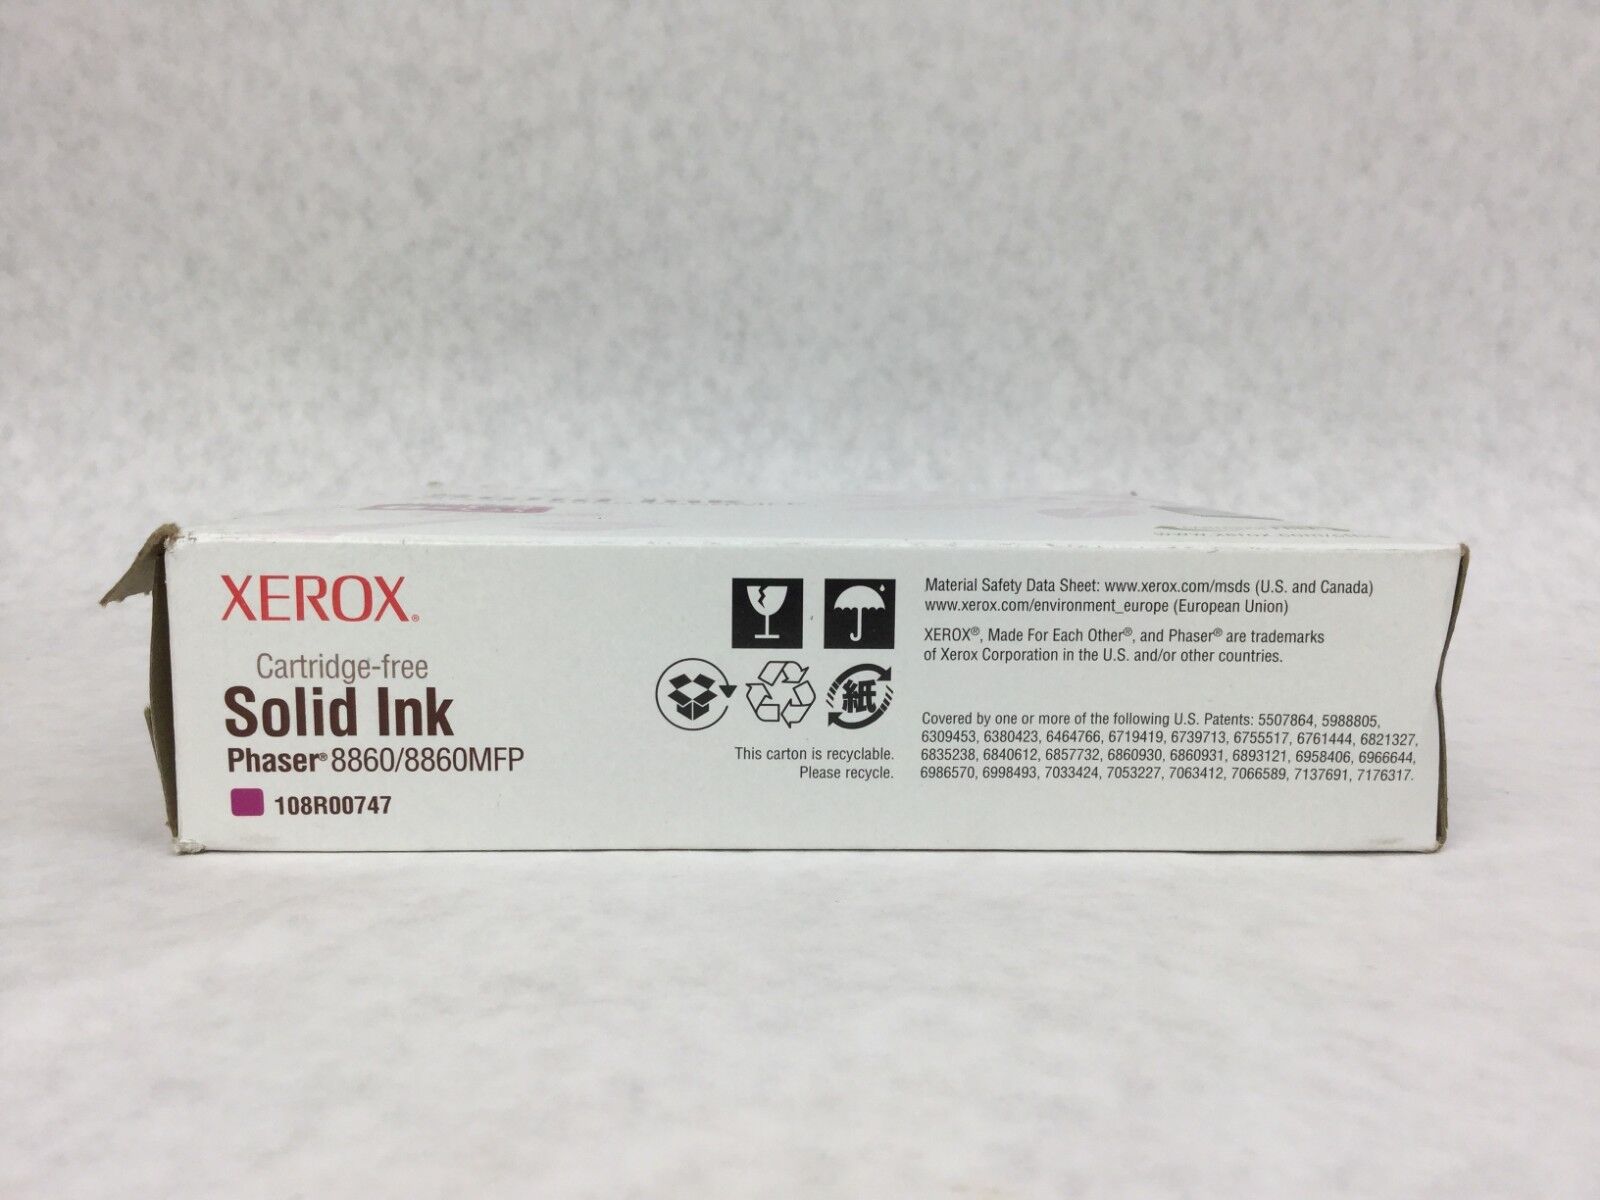 Genuine Xerox Solid Ink Magenta 108R0747 for Phaser 8860/8860MFP  4 in Pack-NEW